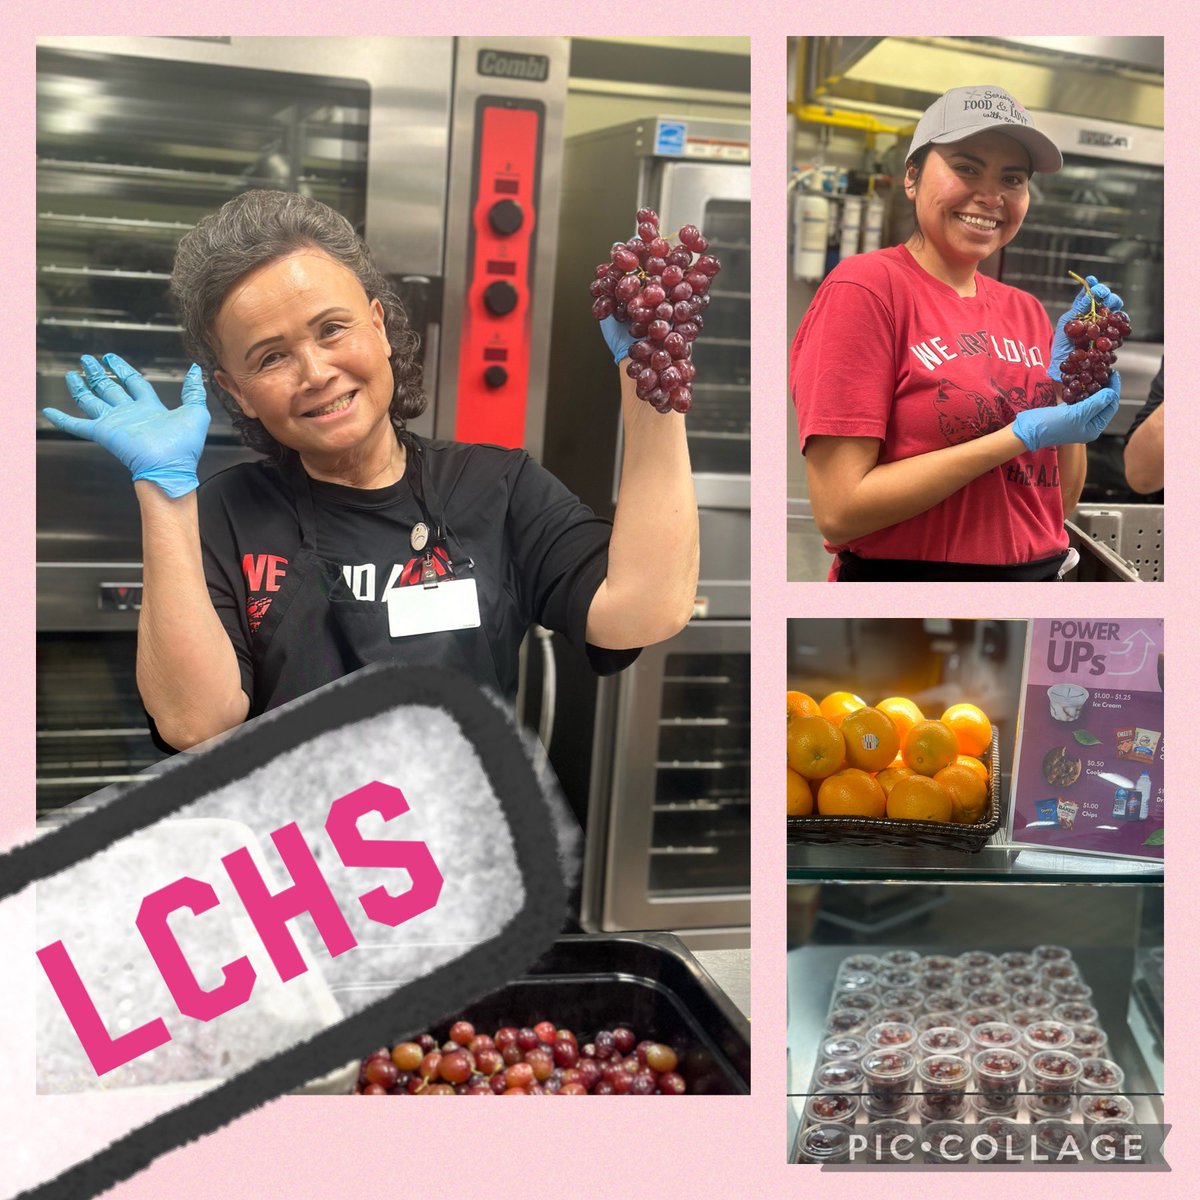 After a busy day, nothing is better than seeing our ladies having a great time portioning the fruit of the day 🍇.